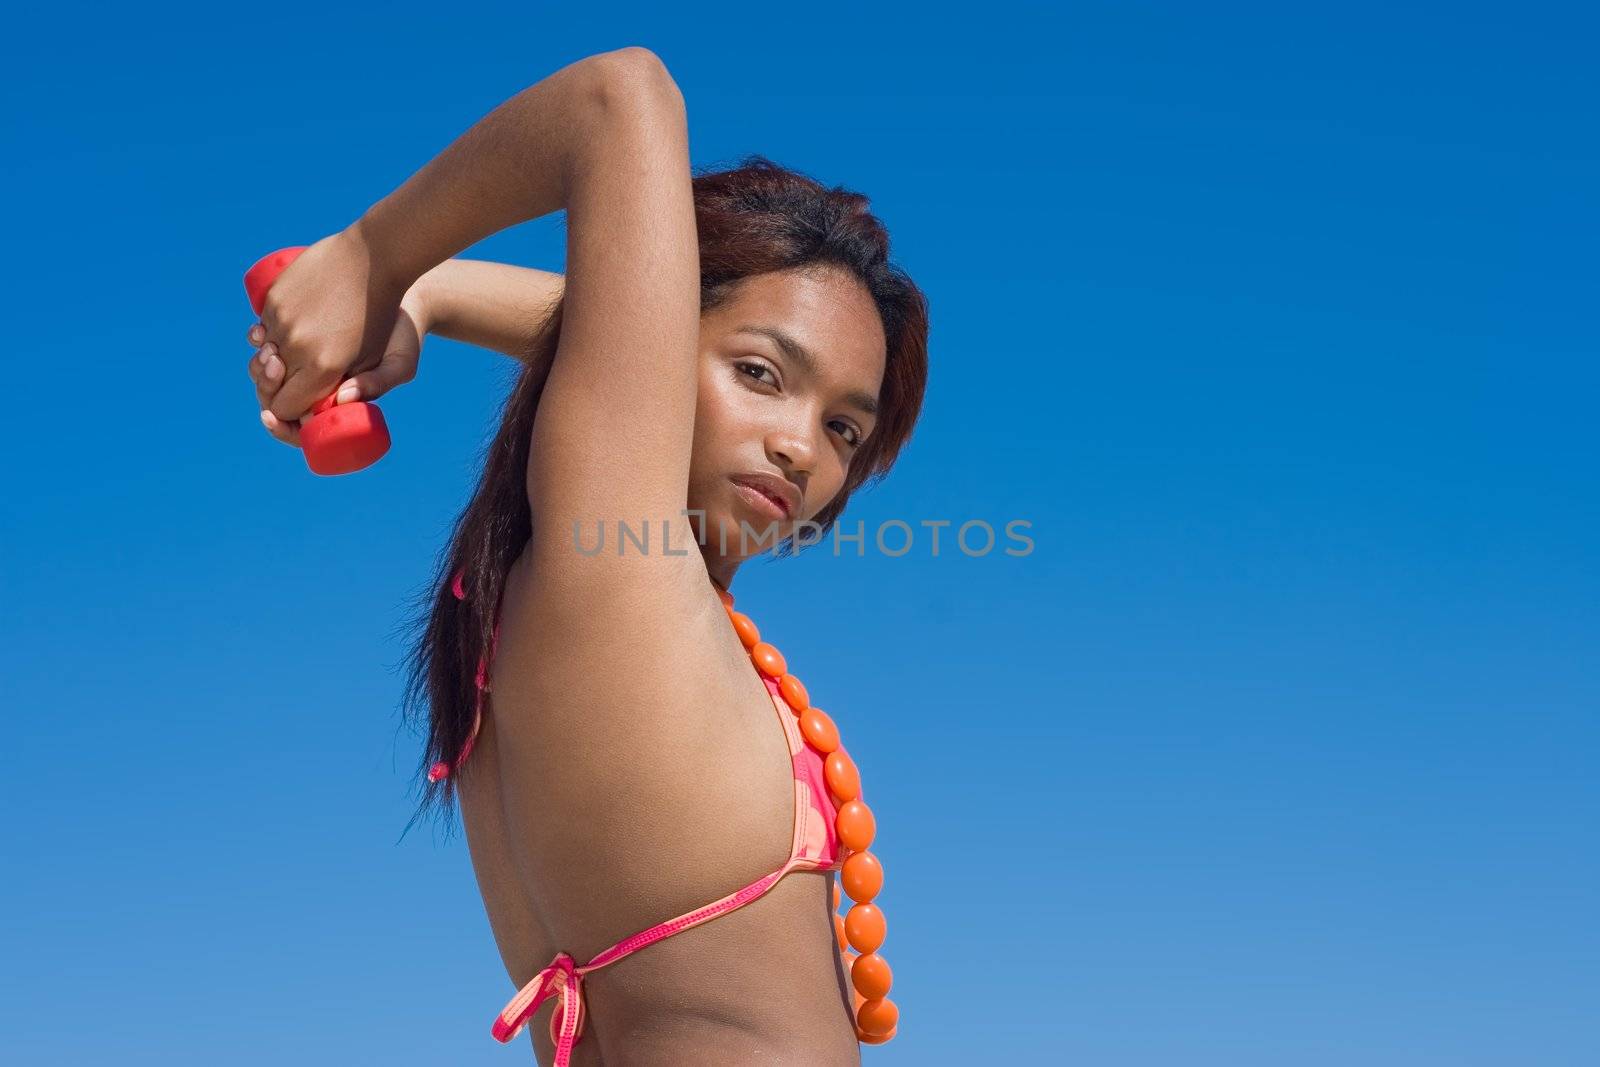 Model with dumbbell exercising with blue sky background.